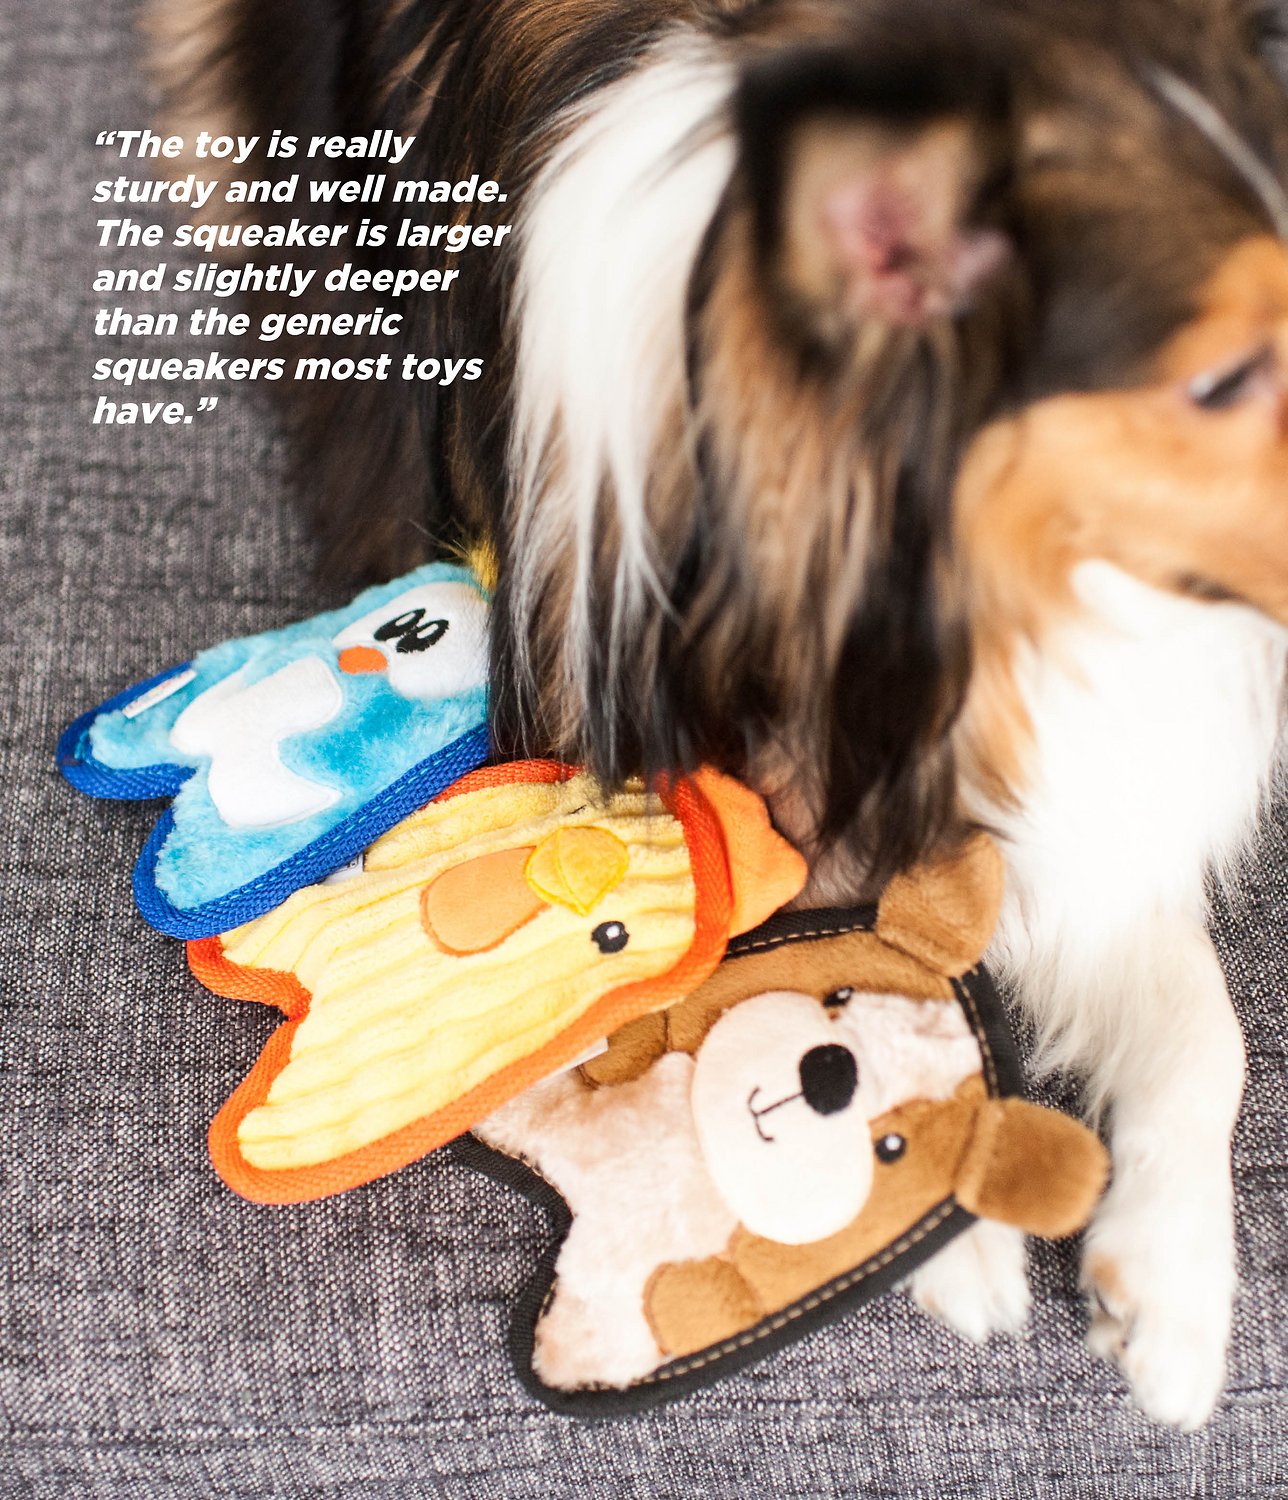 Canine's World Dog Unstuffed Toys Outward Hound Invincibles Minis Puppy Dog Toy Outward Hound